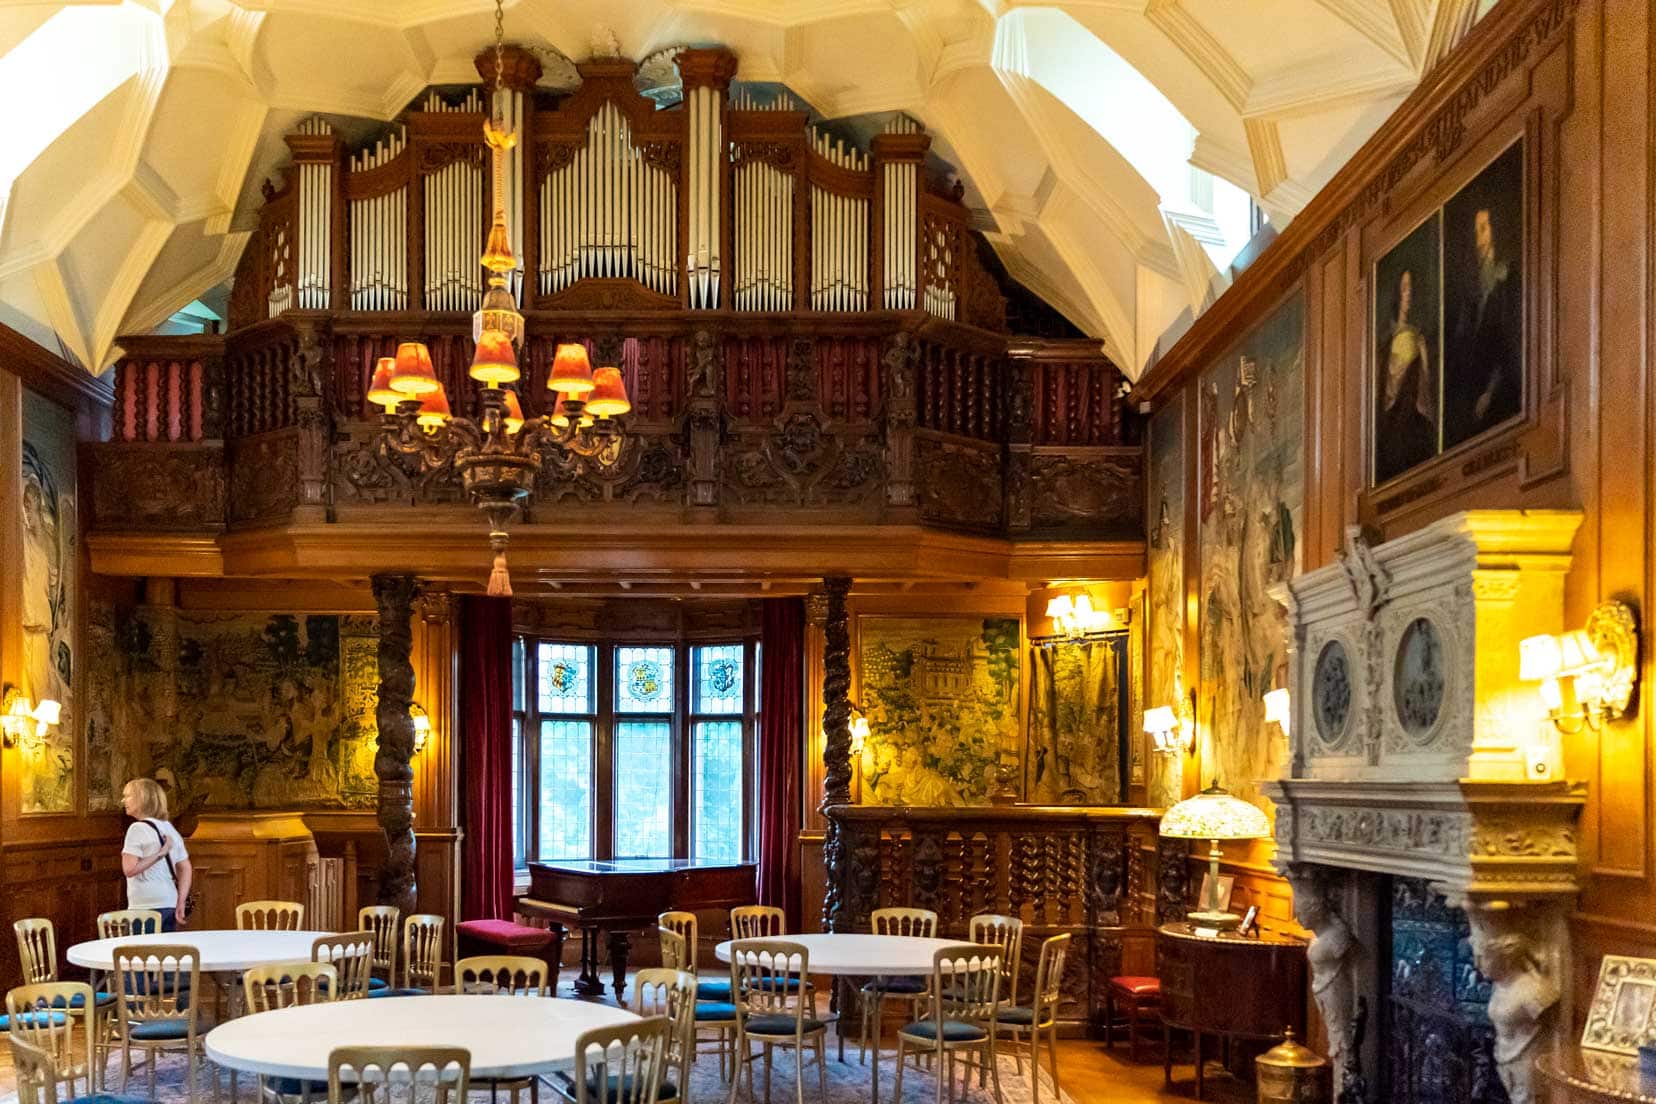 Inside Fyvie Castle with a huge organ at one end of the dining room